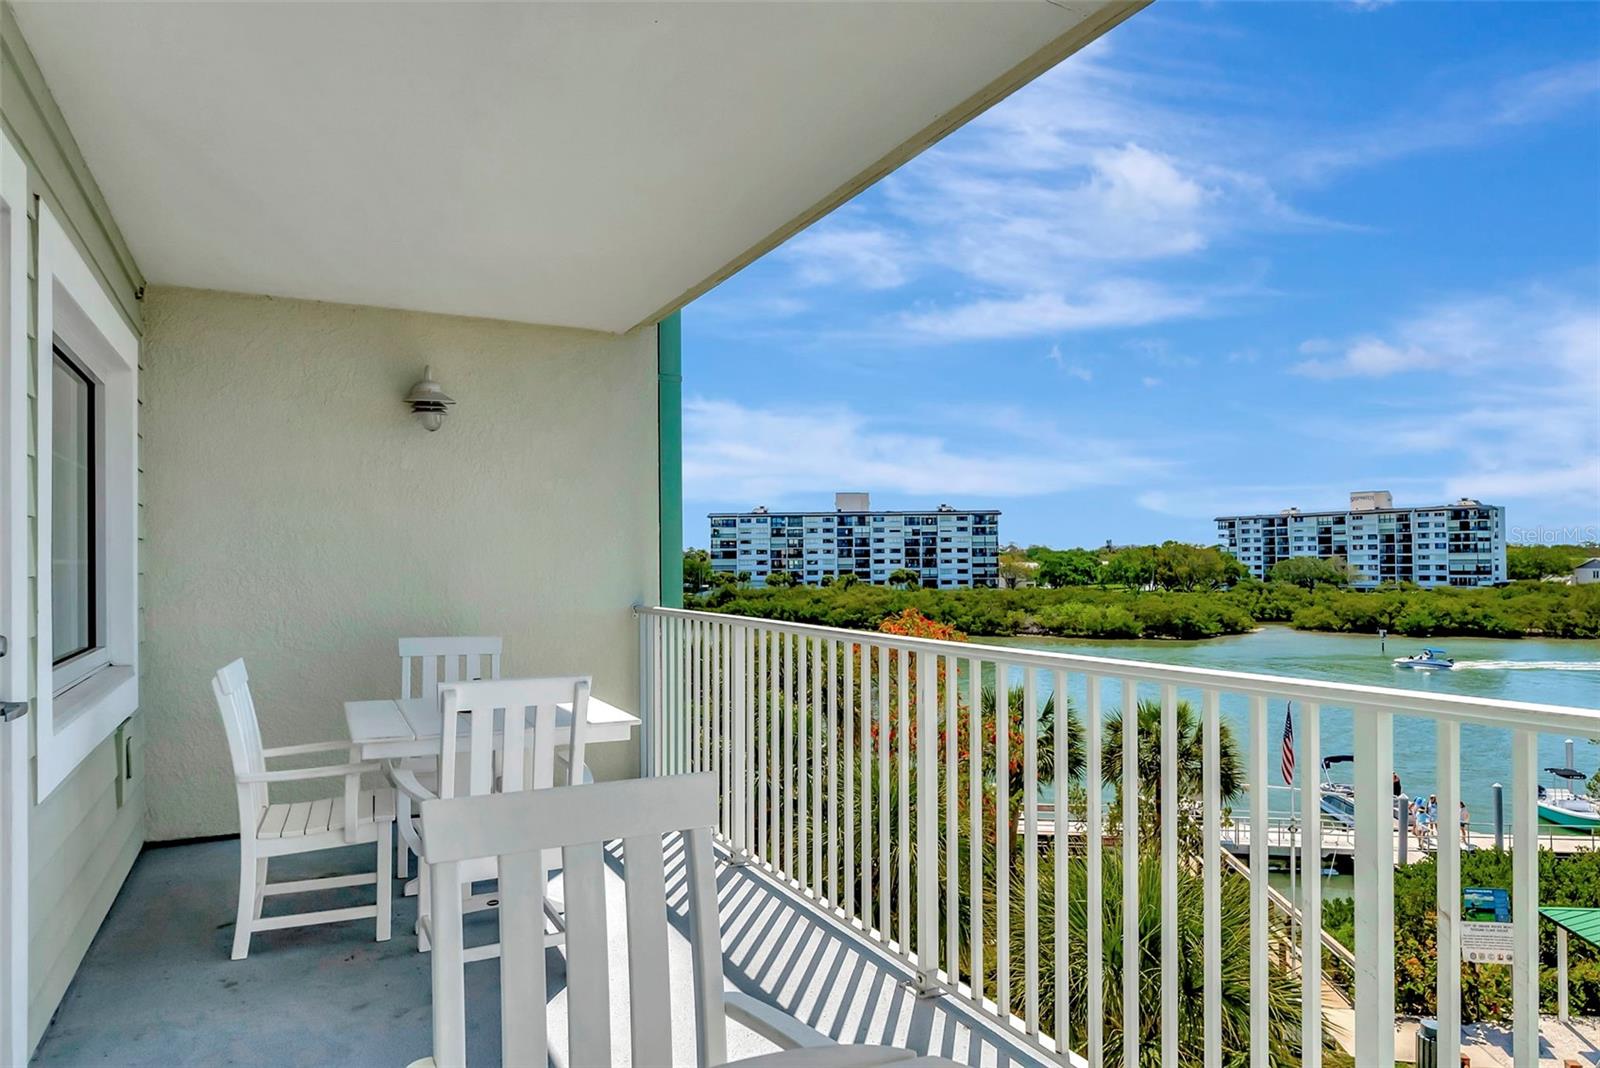 Take a moment to soak in the breathtaking waterview right outside your future unit! Imagine waking up to the serene sight of shimmering waters, with boats lazily drifting by and the sun casting a golden glow across the surface.